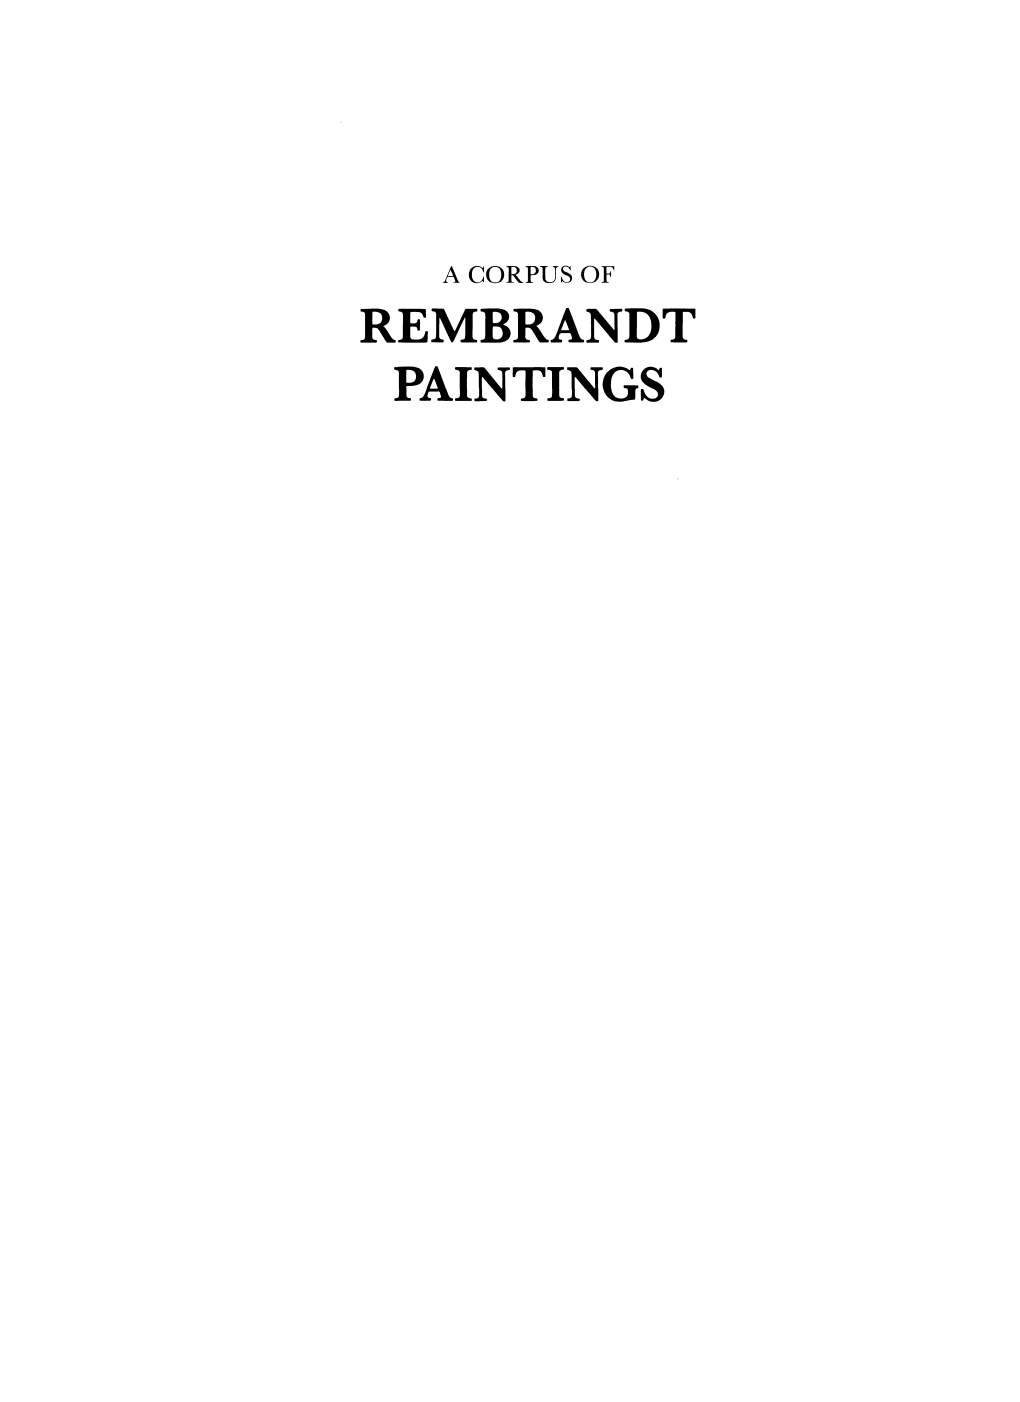 REMBRANDT PAINTINGS Stichting Foundation Rembrandt Research Project